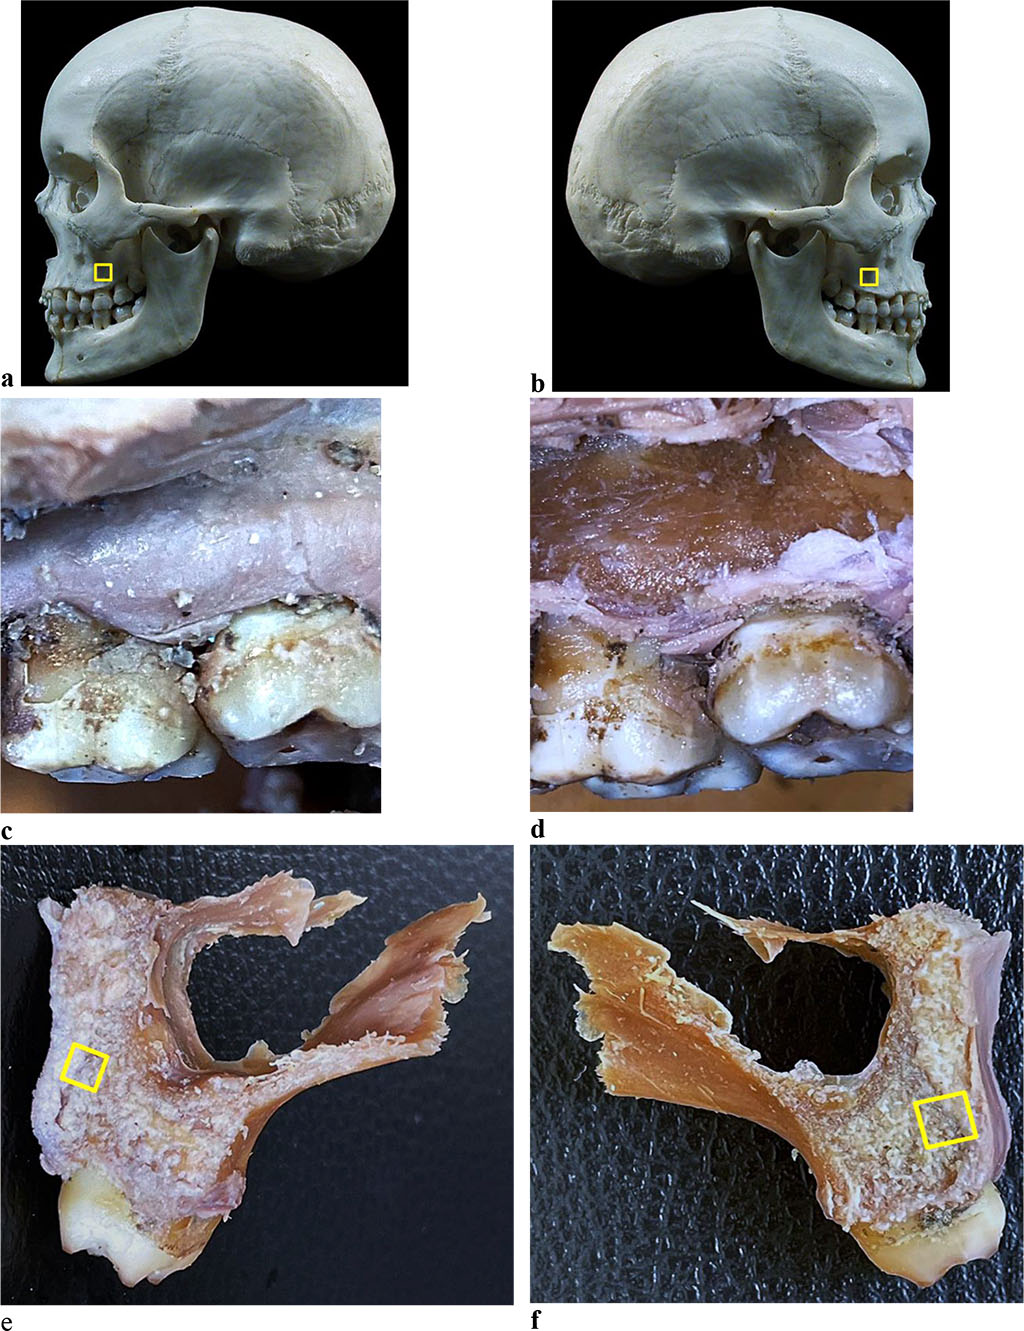 Figure 2. Bone biopsy specimen from the distal alveolar process of the maxilla with preserved dentition: a, b - areas for taking bone preparations on the skull; anatomical preparation before (c) and after (d) separation of the muco-periosteal flap in the area of the 26th tooth; areas for taking a bone preparation on the maxillary first molar segment (e - 16 tooth, f - 26 tooth).